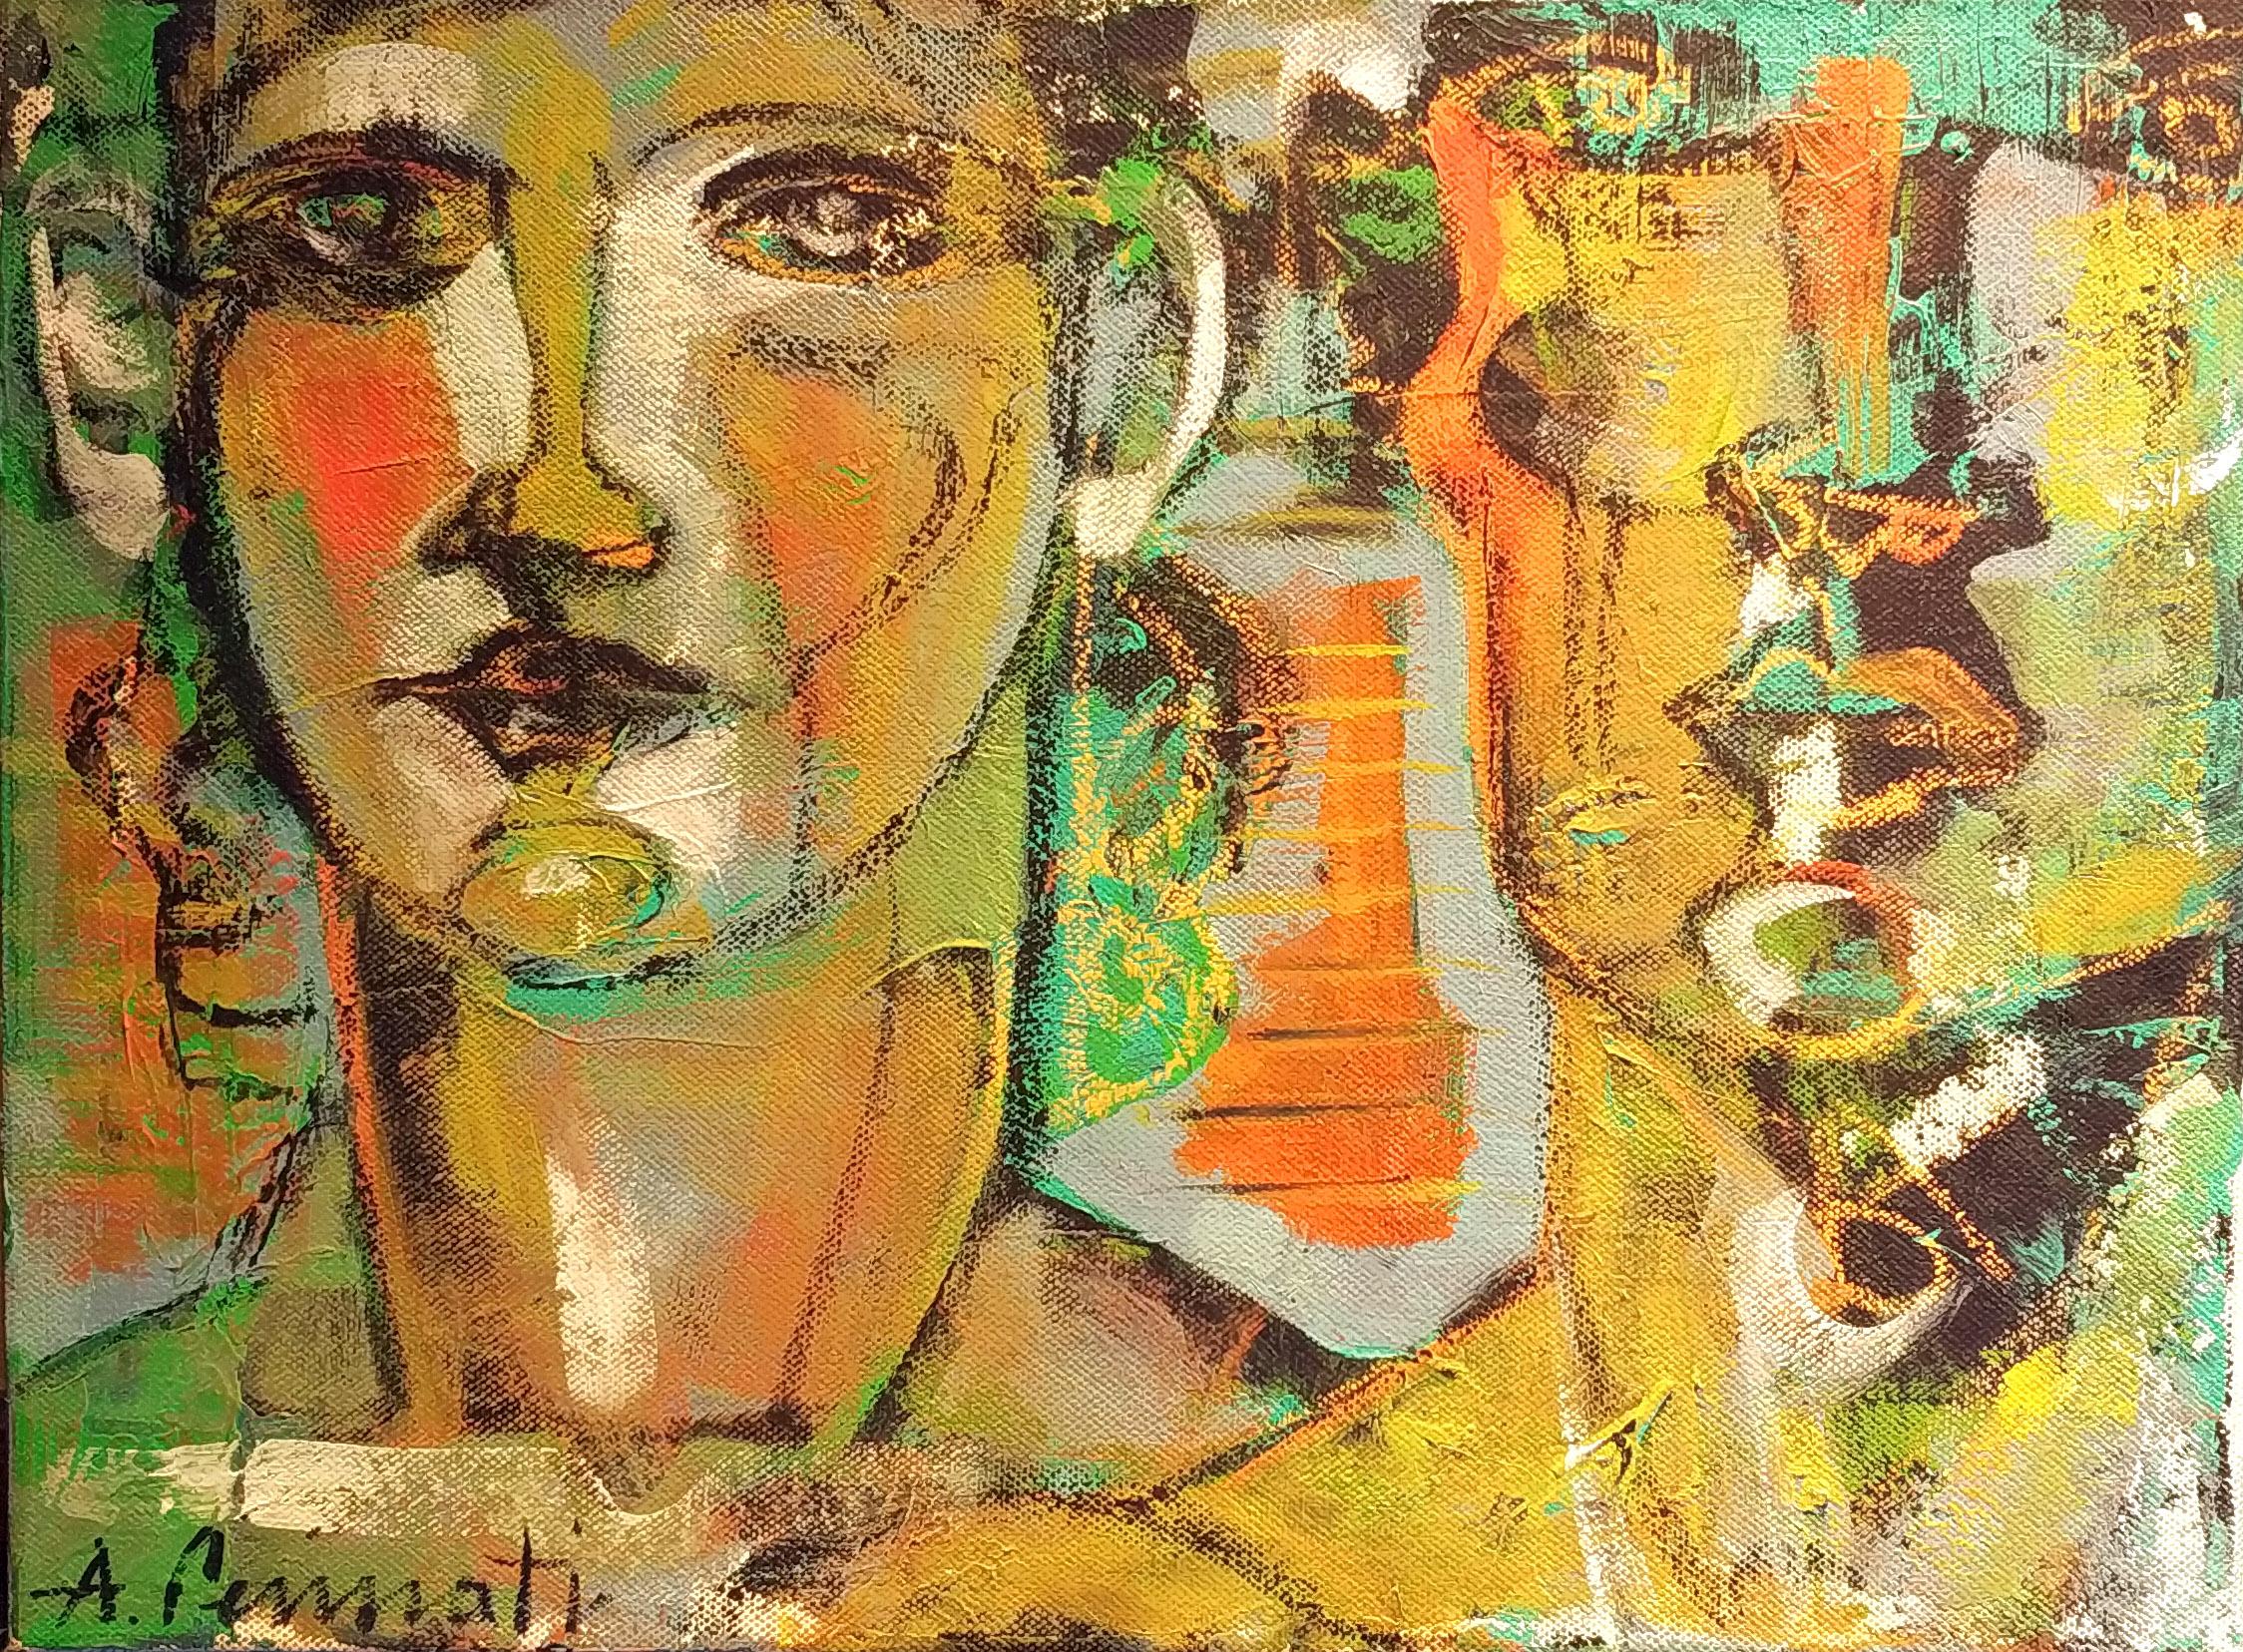 "Double portrait in green" by Anna Pennati, acrilyc on canvas